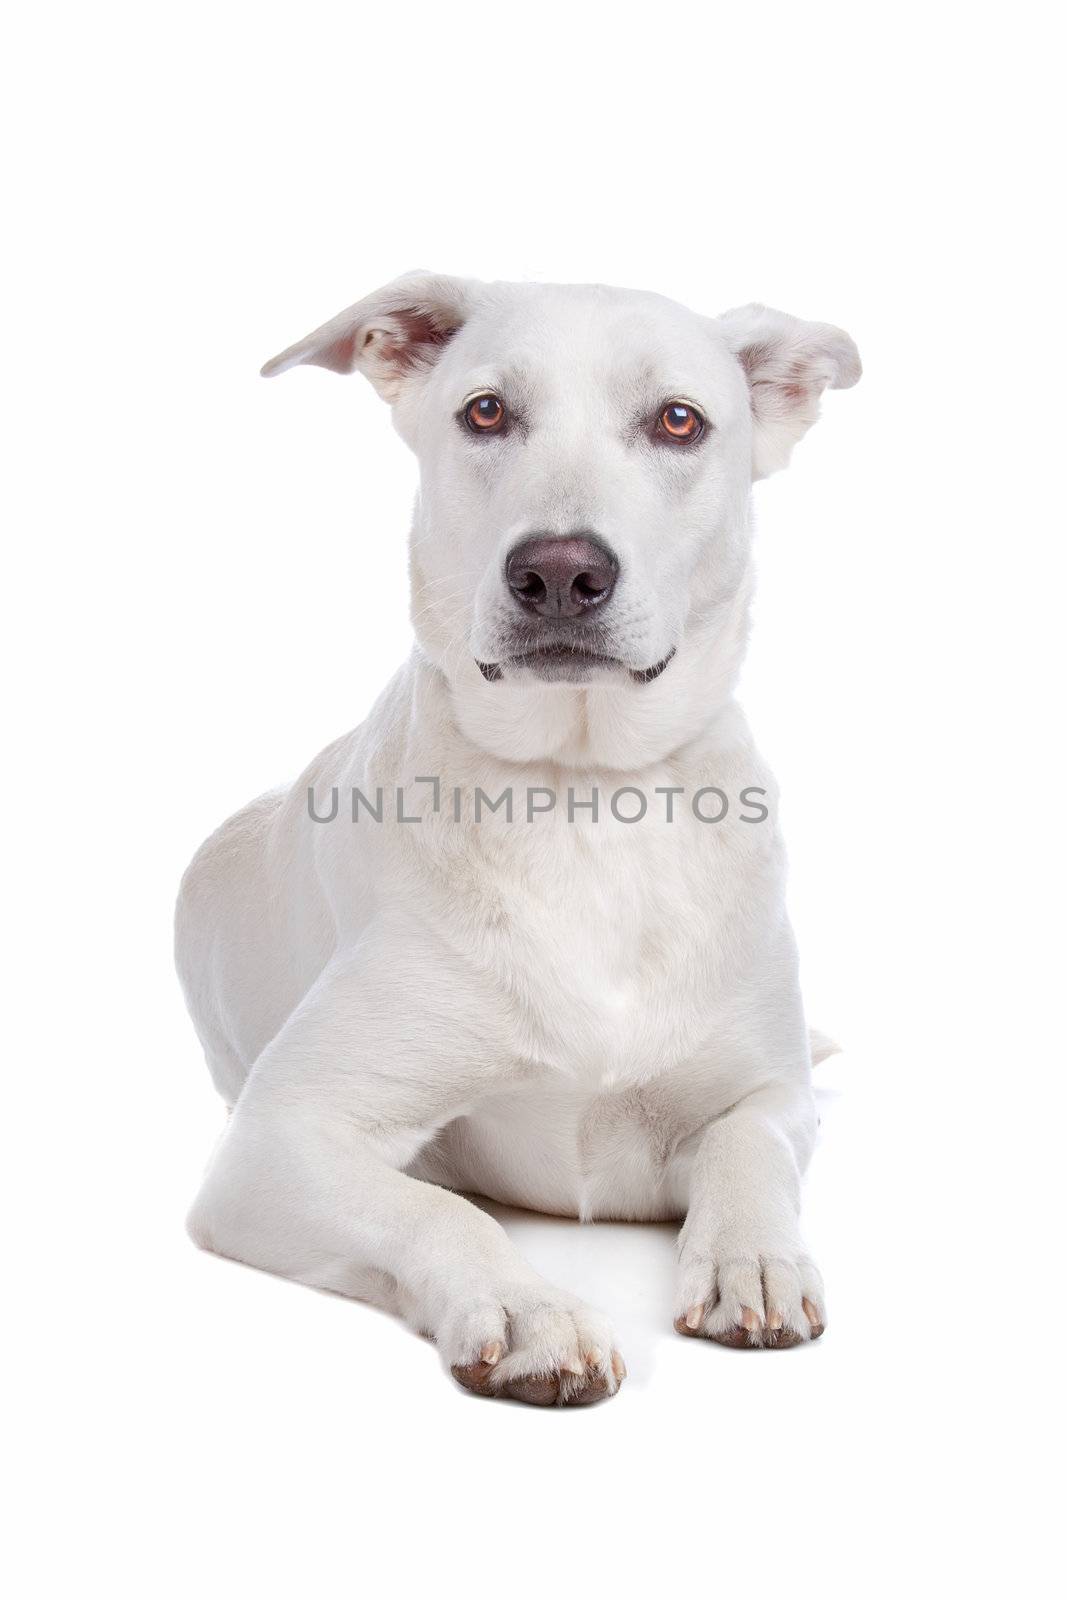 Mixed breeds white shepherd and labrador dog isolated on a white background